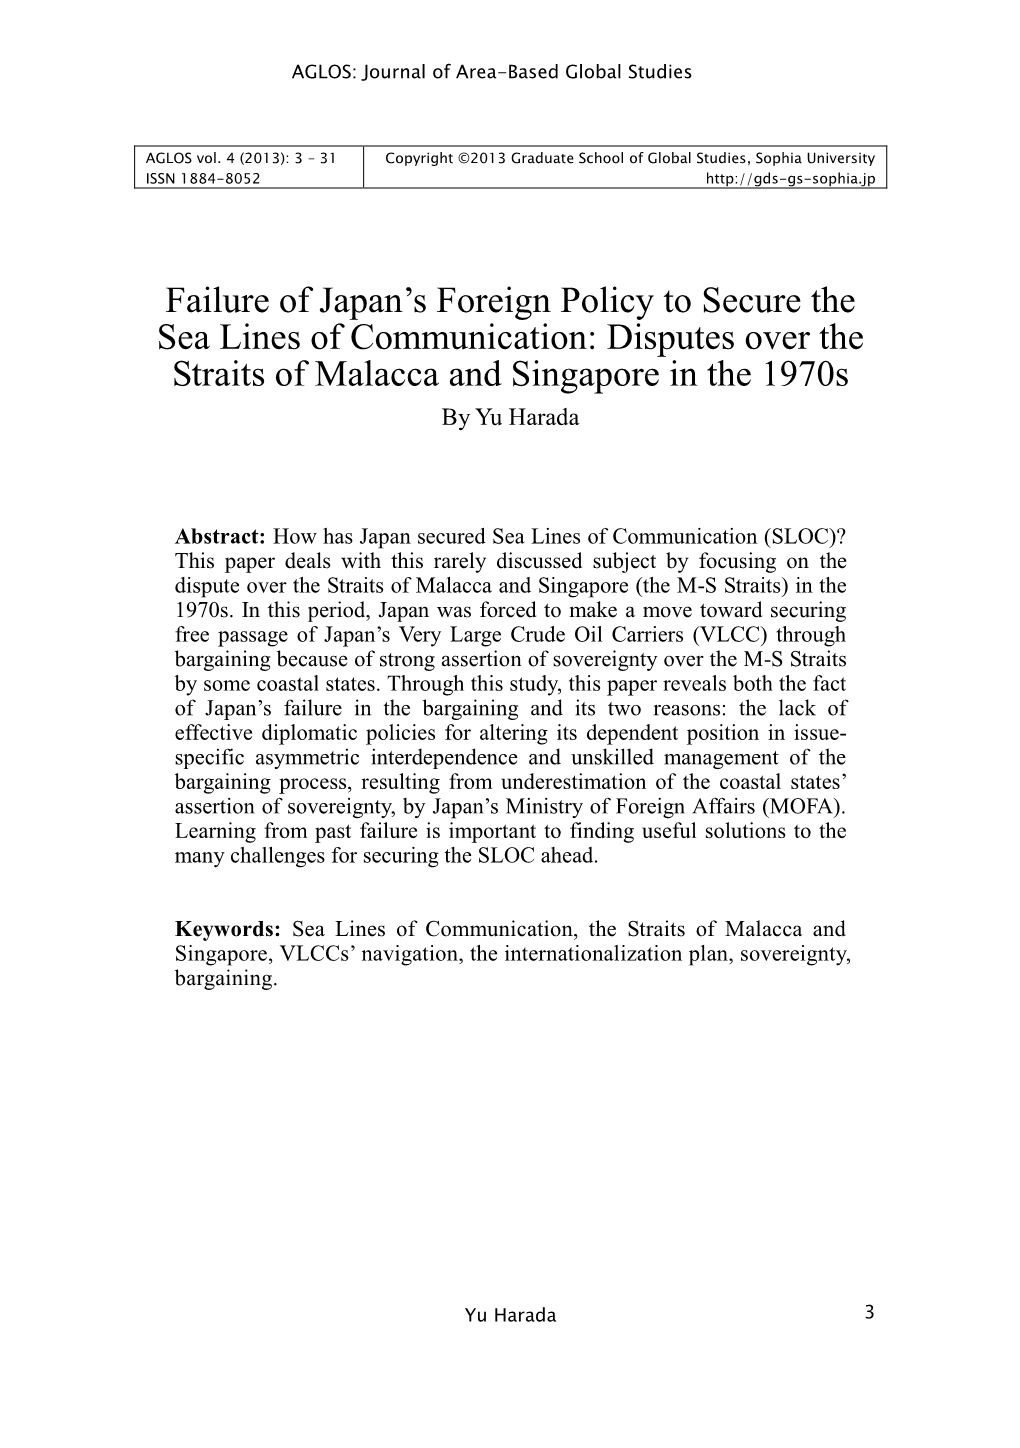 Failure of Japan's Foreign Policy to Secure the Sea Lines Of